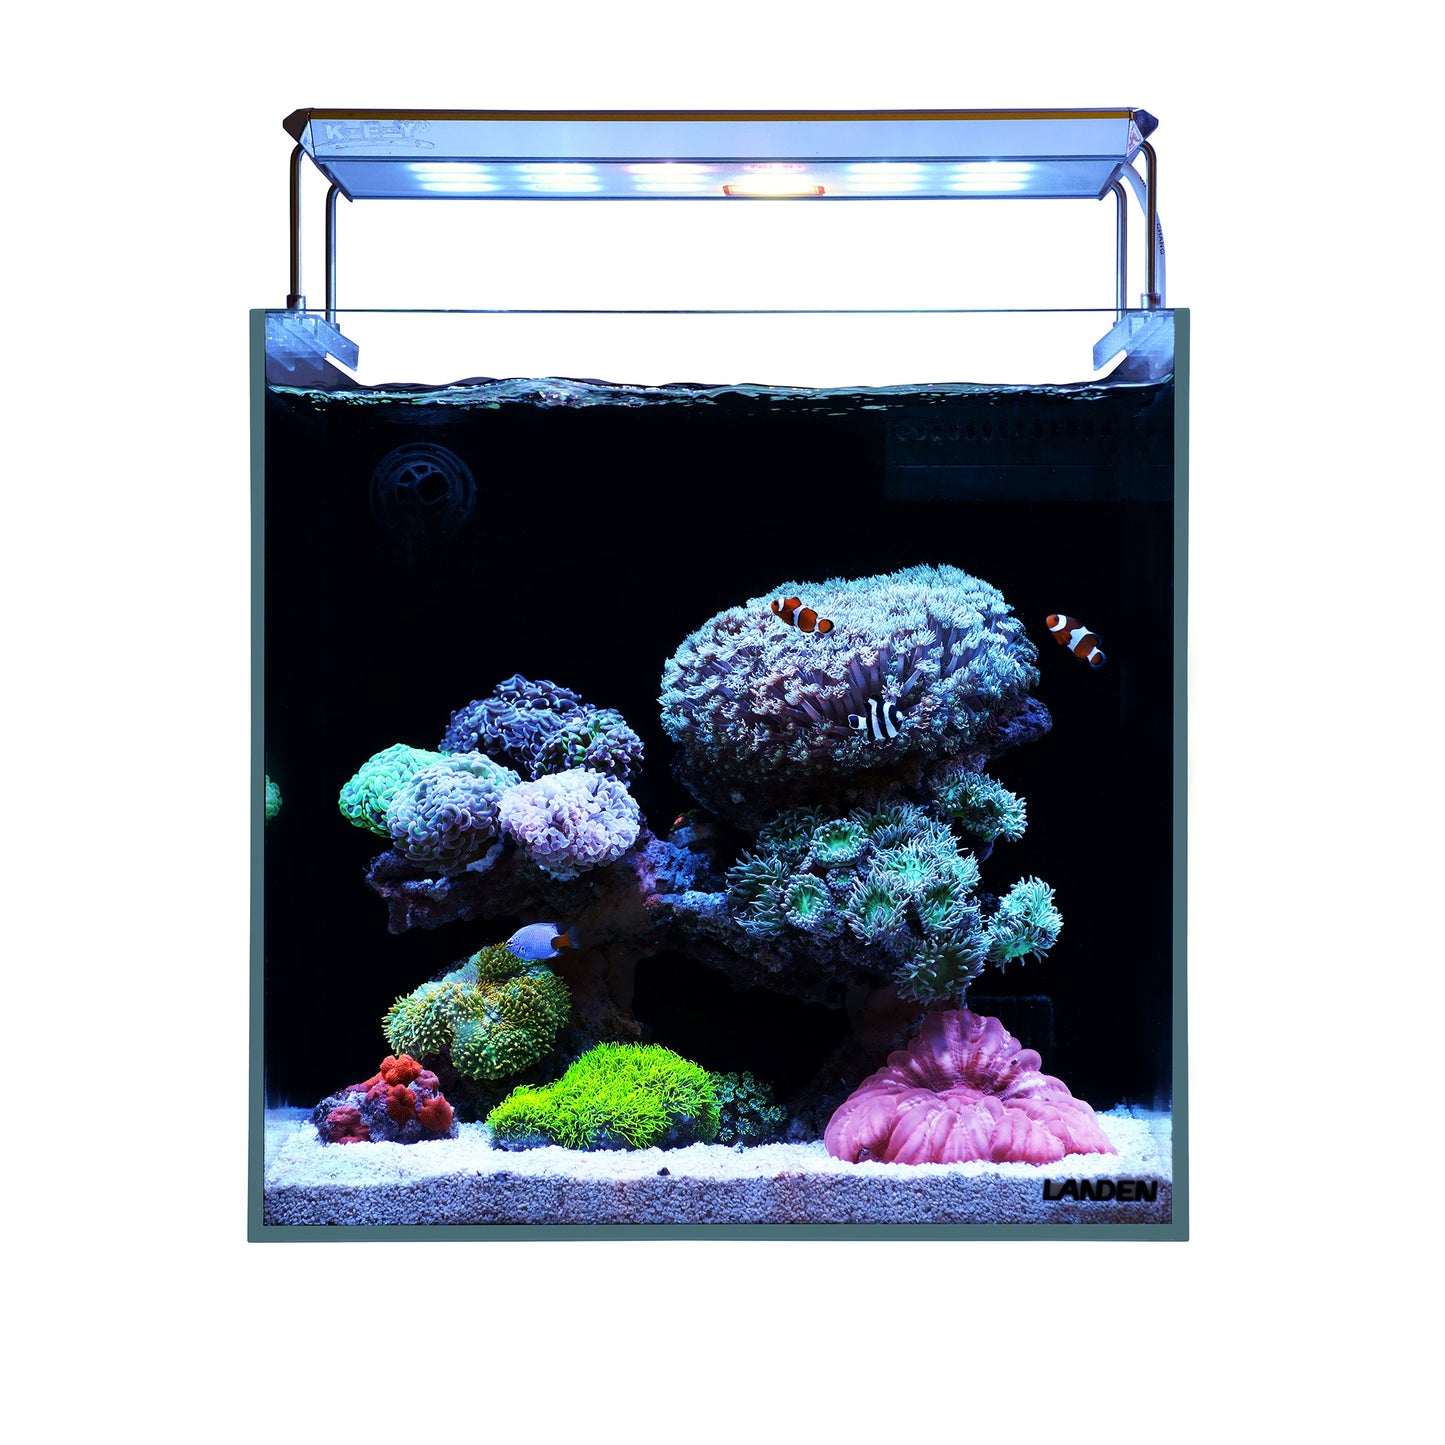 Landen 35C 10 Gallon Ultra Clear All Glass Rimless Low Iron Aquarium Tank with Rear Filtration Chamber(Return Pump Included)for Salt and Fresh Water.13.8''Wx13.8''Dx13.8''H in(35x35x35cm)